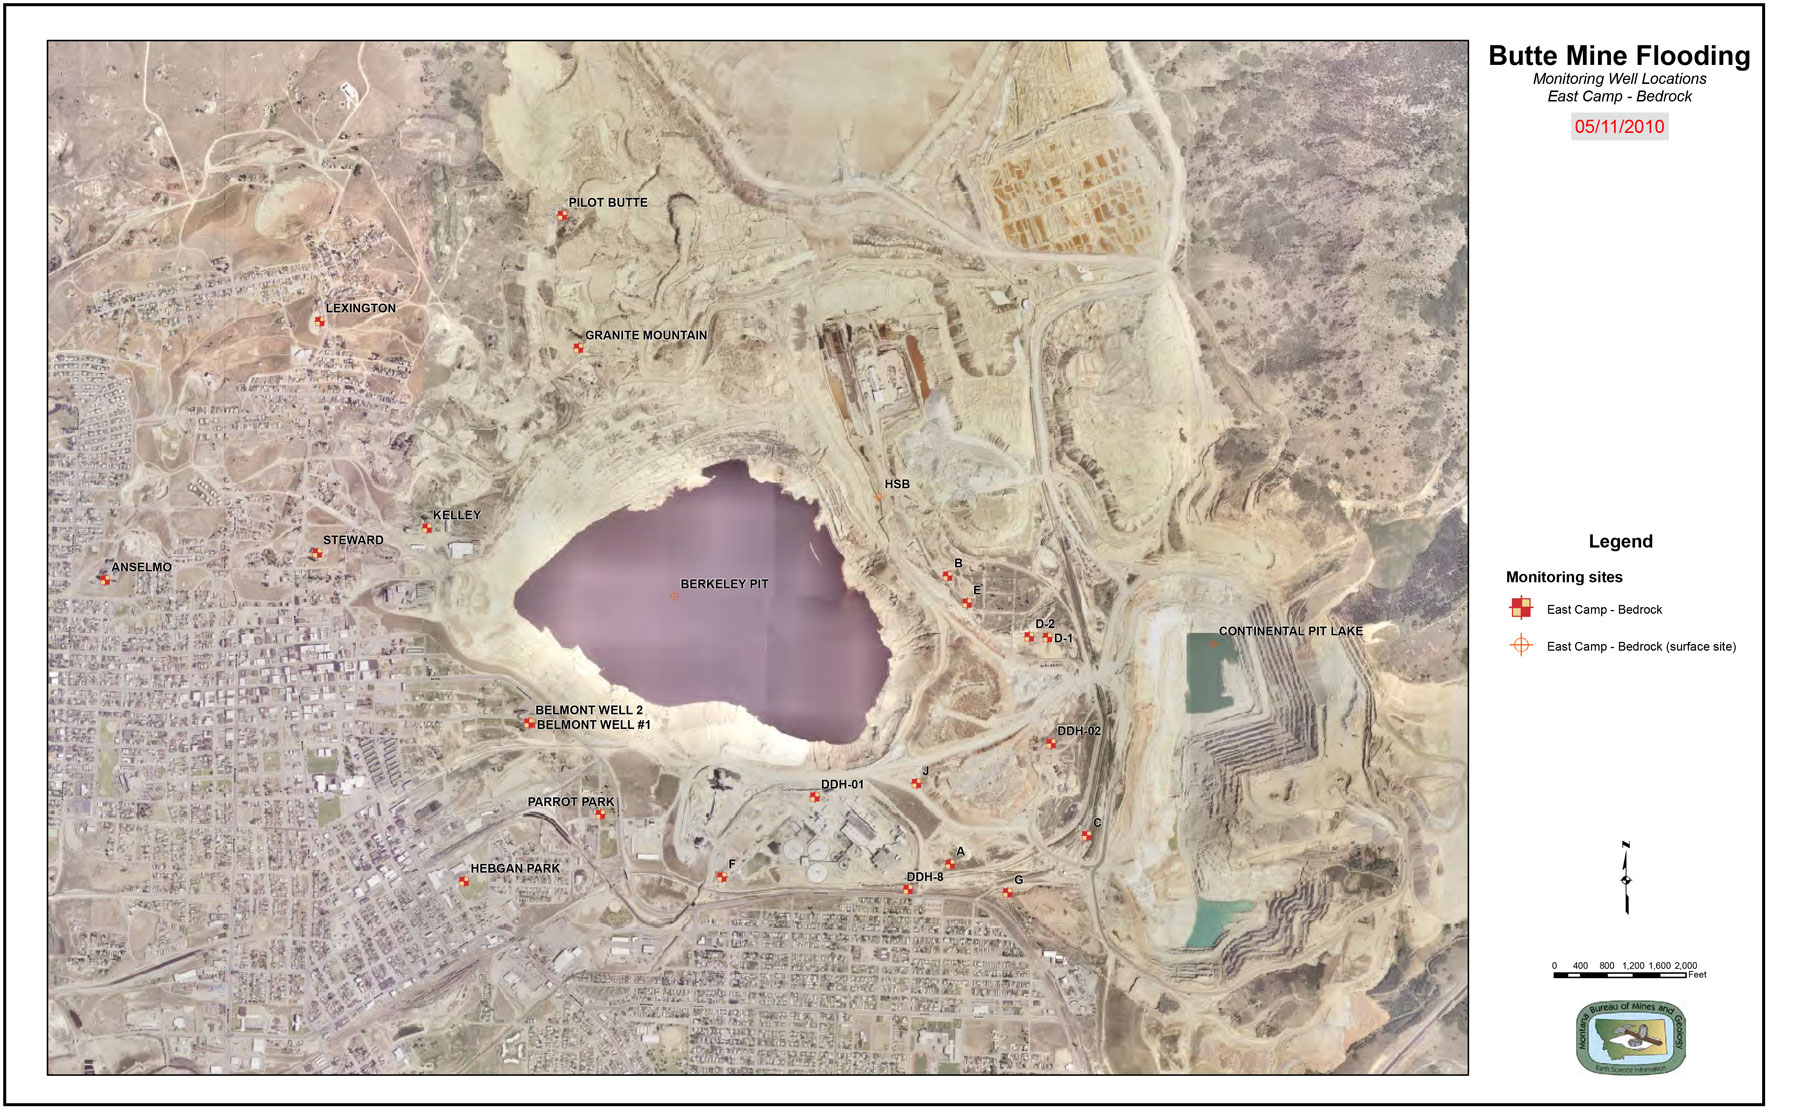 This map shows the locations of groundwater monitoring points for the bedrock aquifer in the East Camp area of the Butte Mine Flooding Operable Unit of the greater Butte Superfund site.